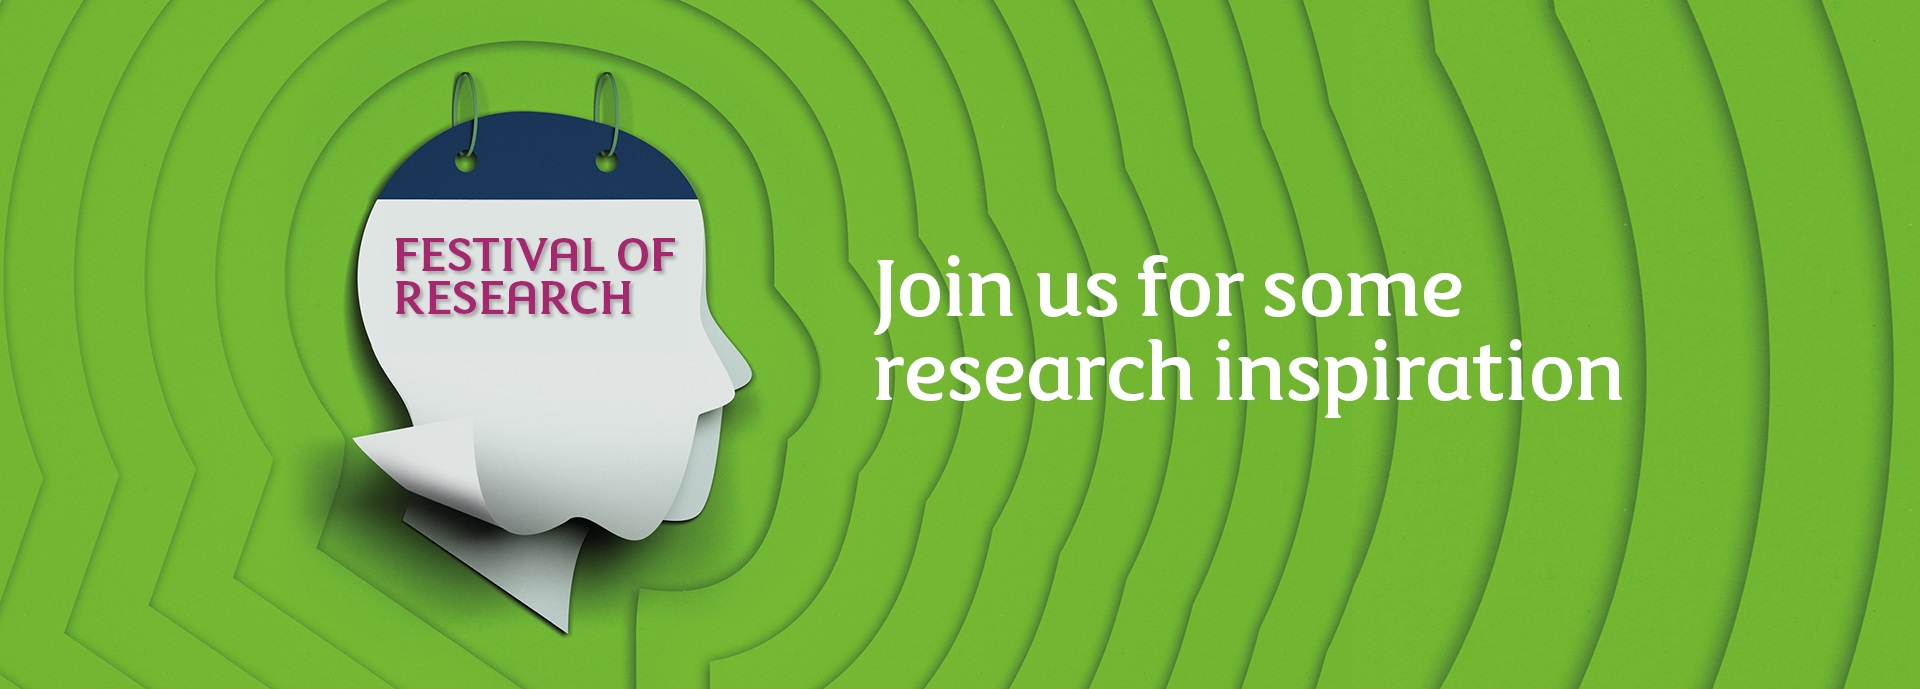 Join us for some research inspiration